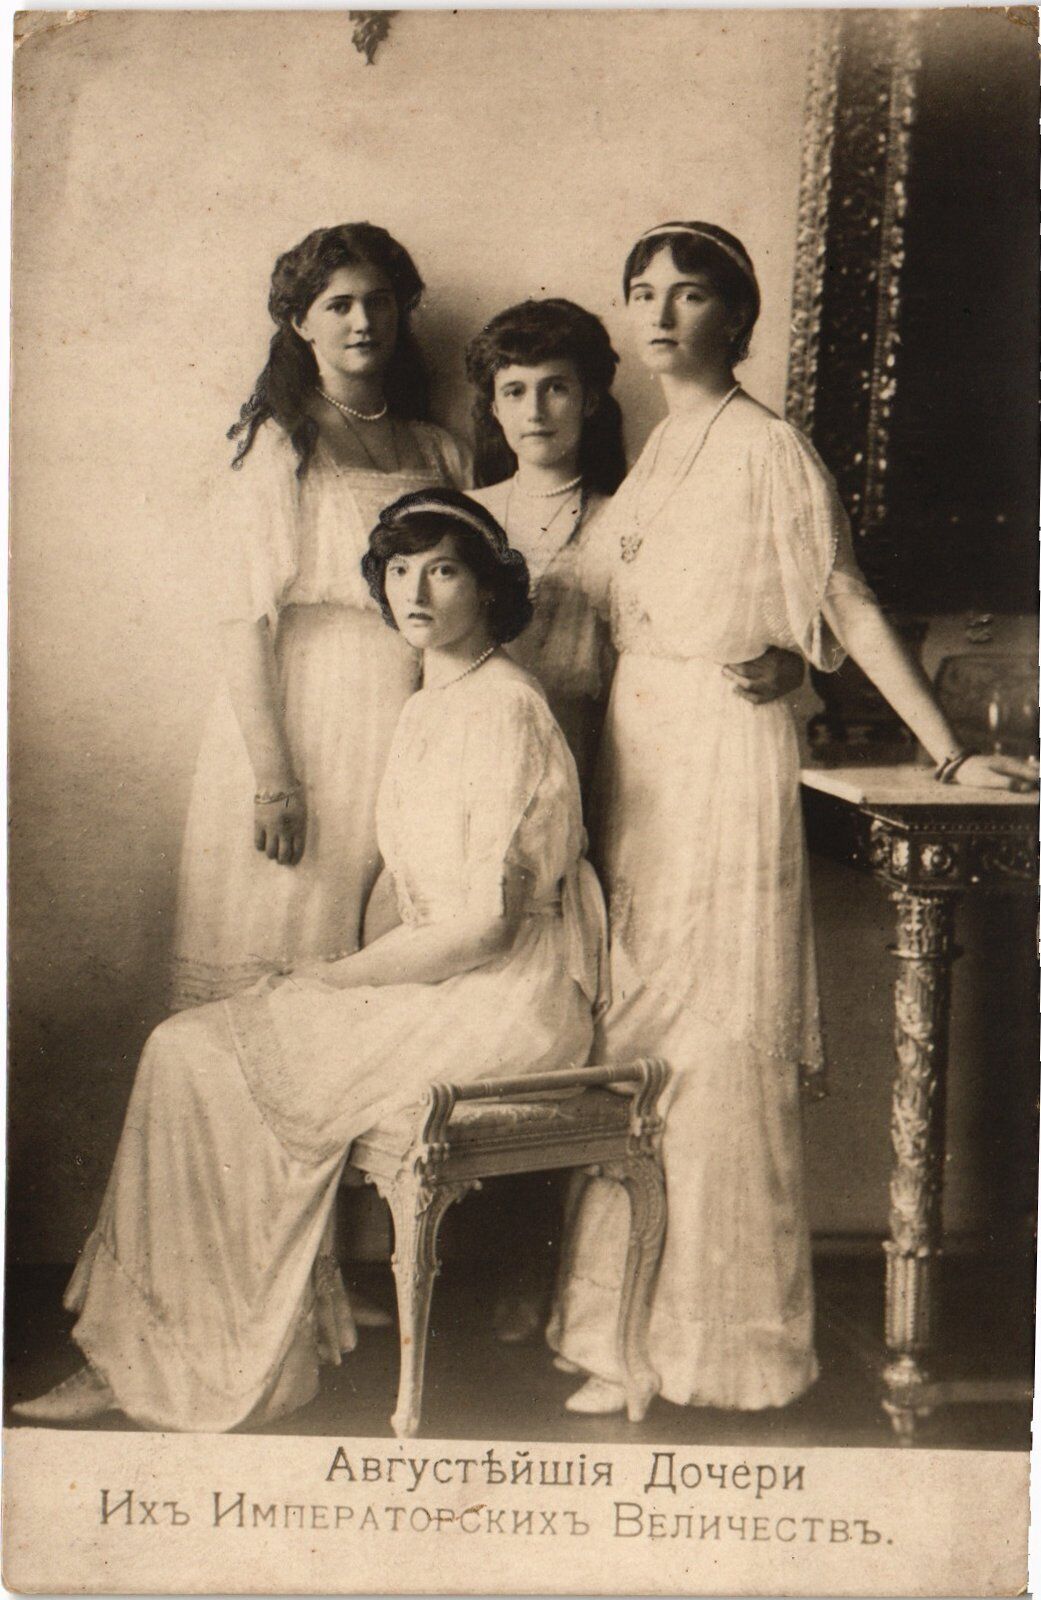 PC RUSSIAN ROYALTY ROMOV IMPERIAL SISTERS (a48528)